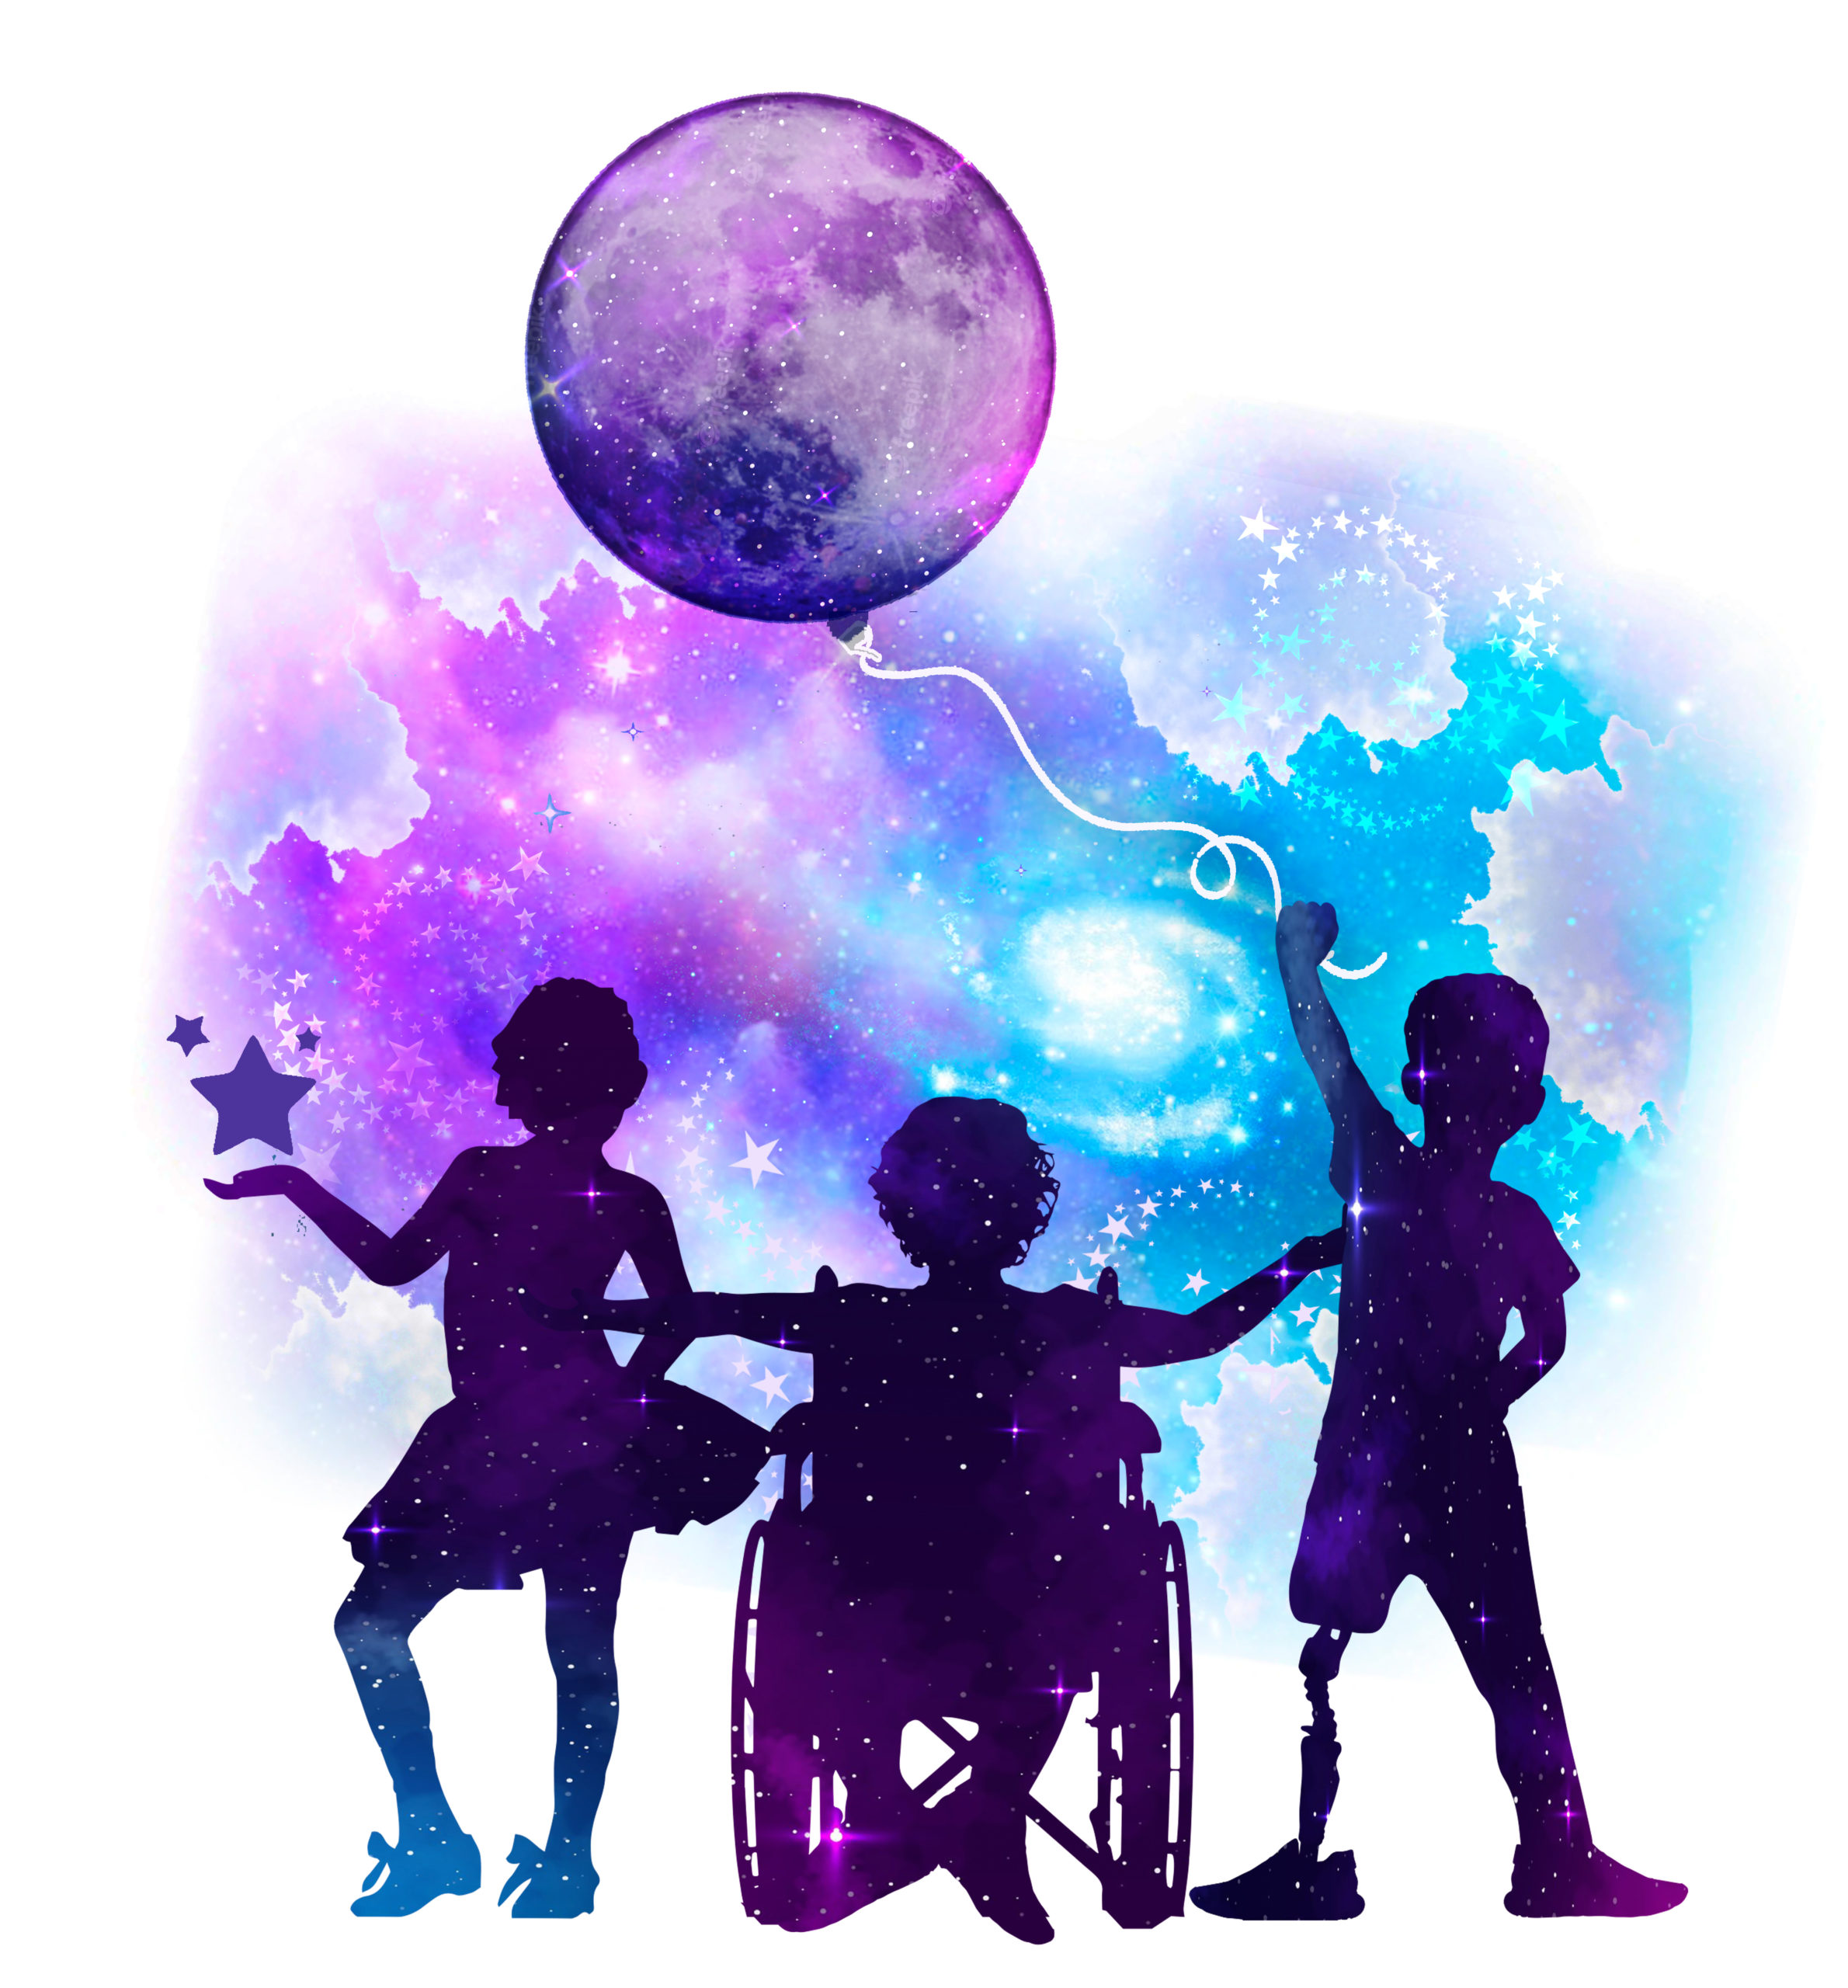 Silhouette of children with unique abilities in front of a galaxy artistic background 